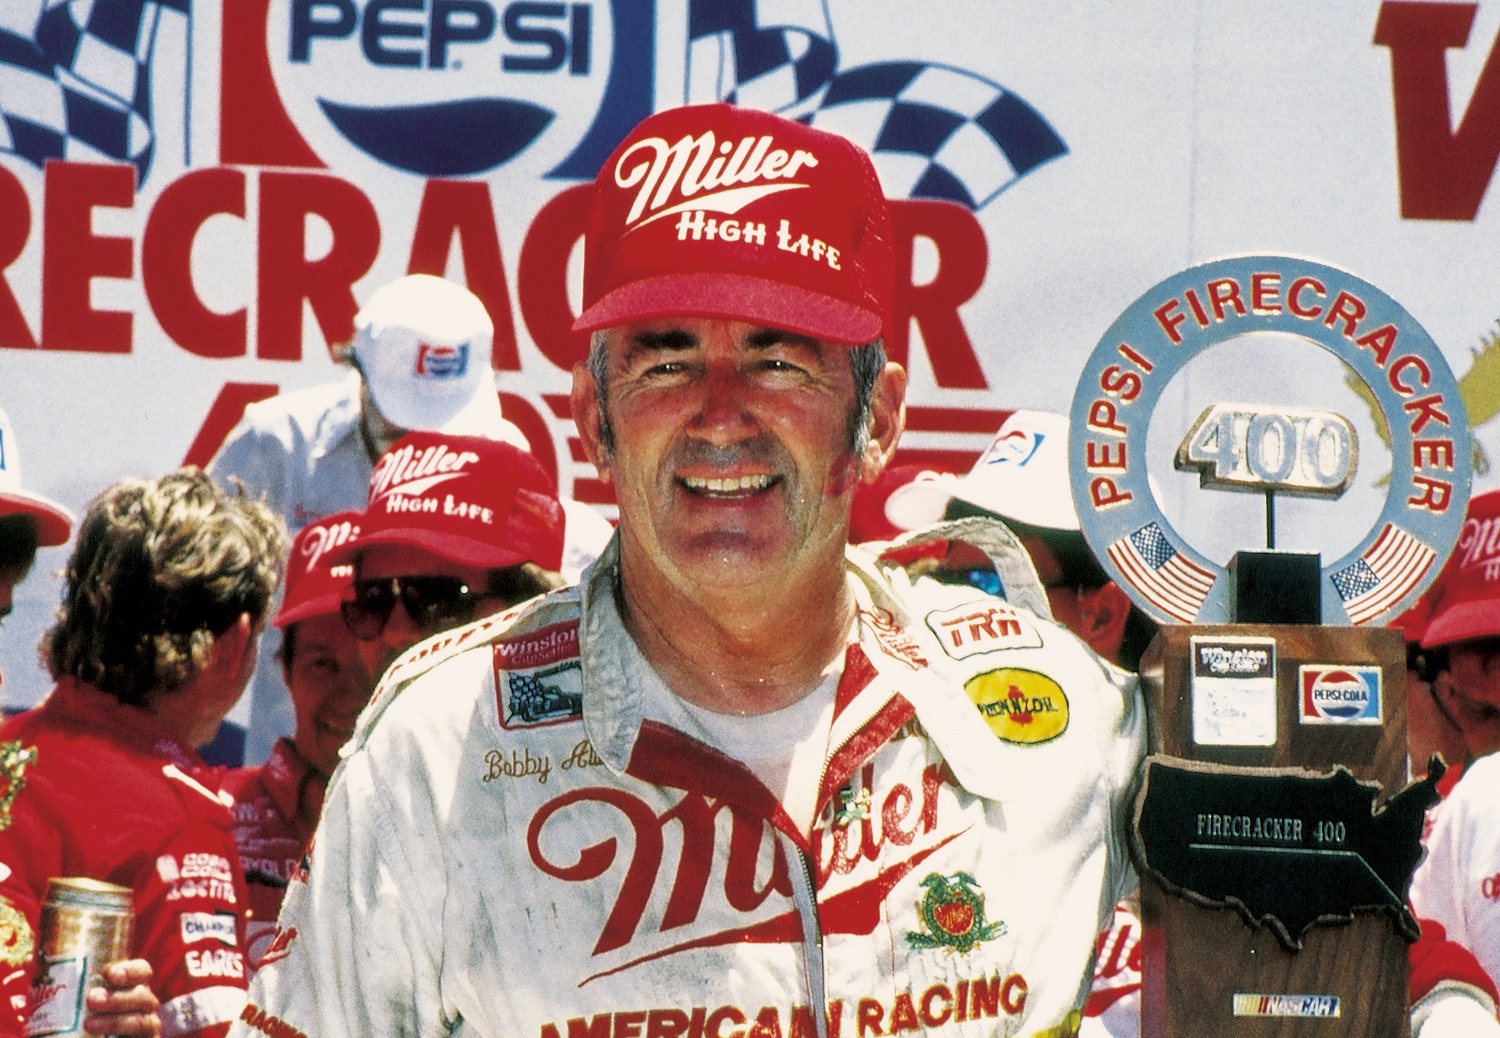 Bobby Allison poses by his car at Daytona Beach, Florida, on July 4, 1987. He took the lead with two laps remaining to win the 1987 Pepsi 400 at Daytona in the Stavola Bros. Buick.